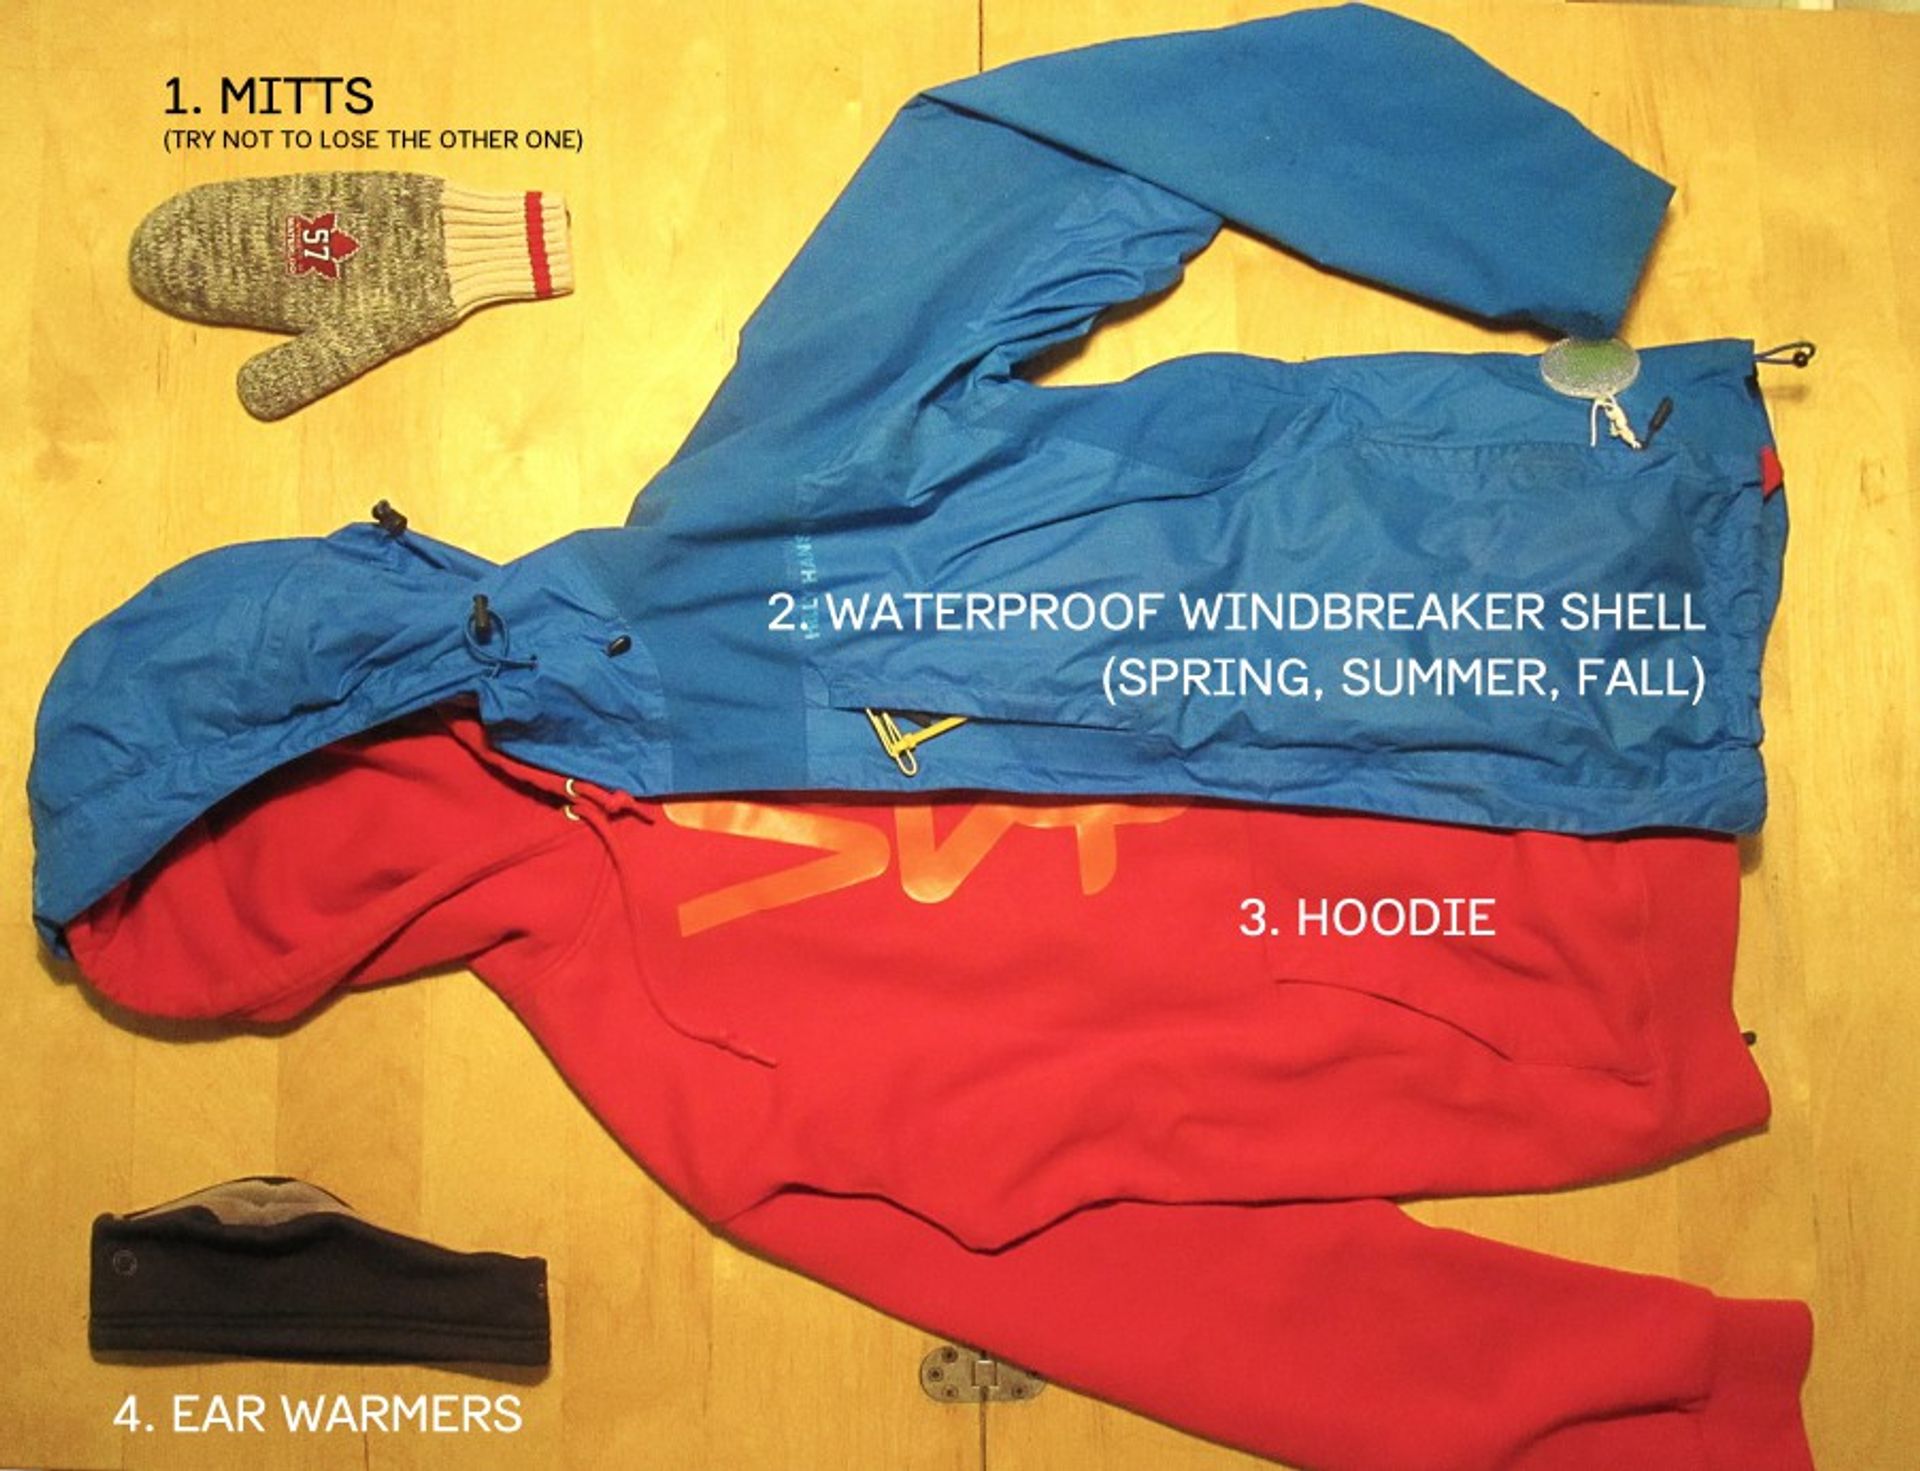 Assortment of clothing including ear warmers, mitts, hoodie and waterproof jacket.